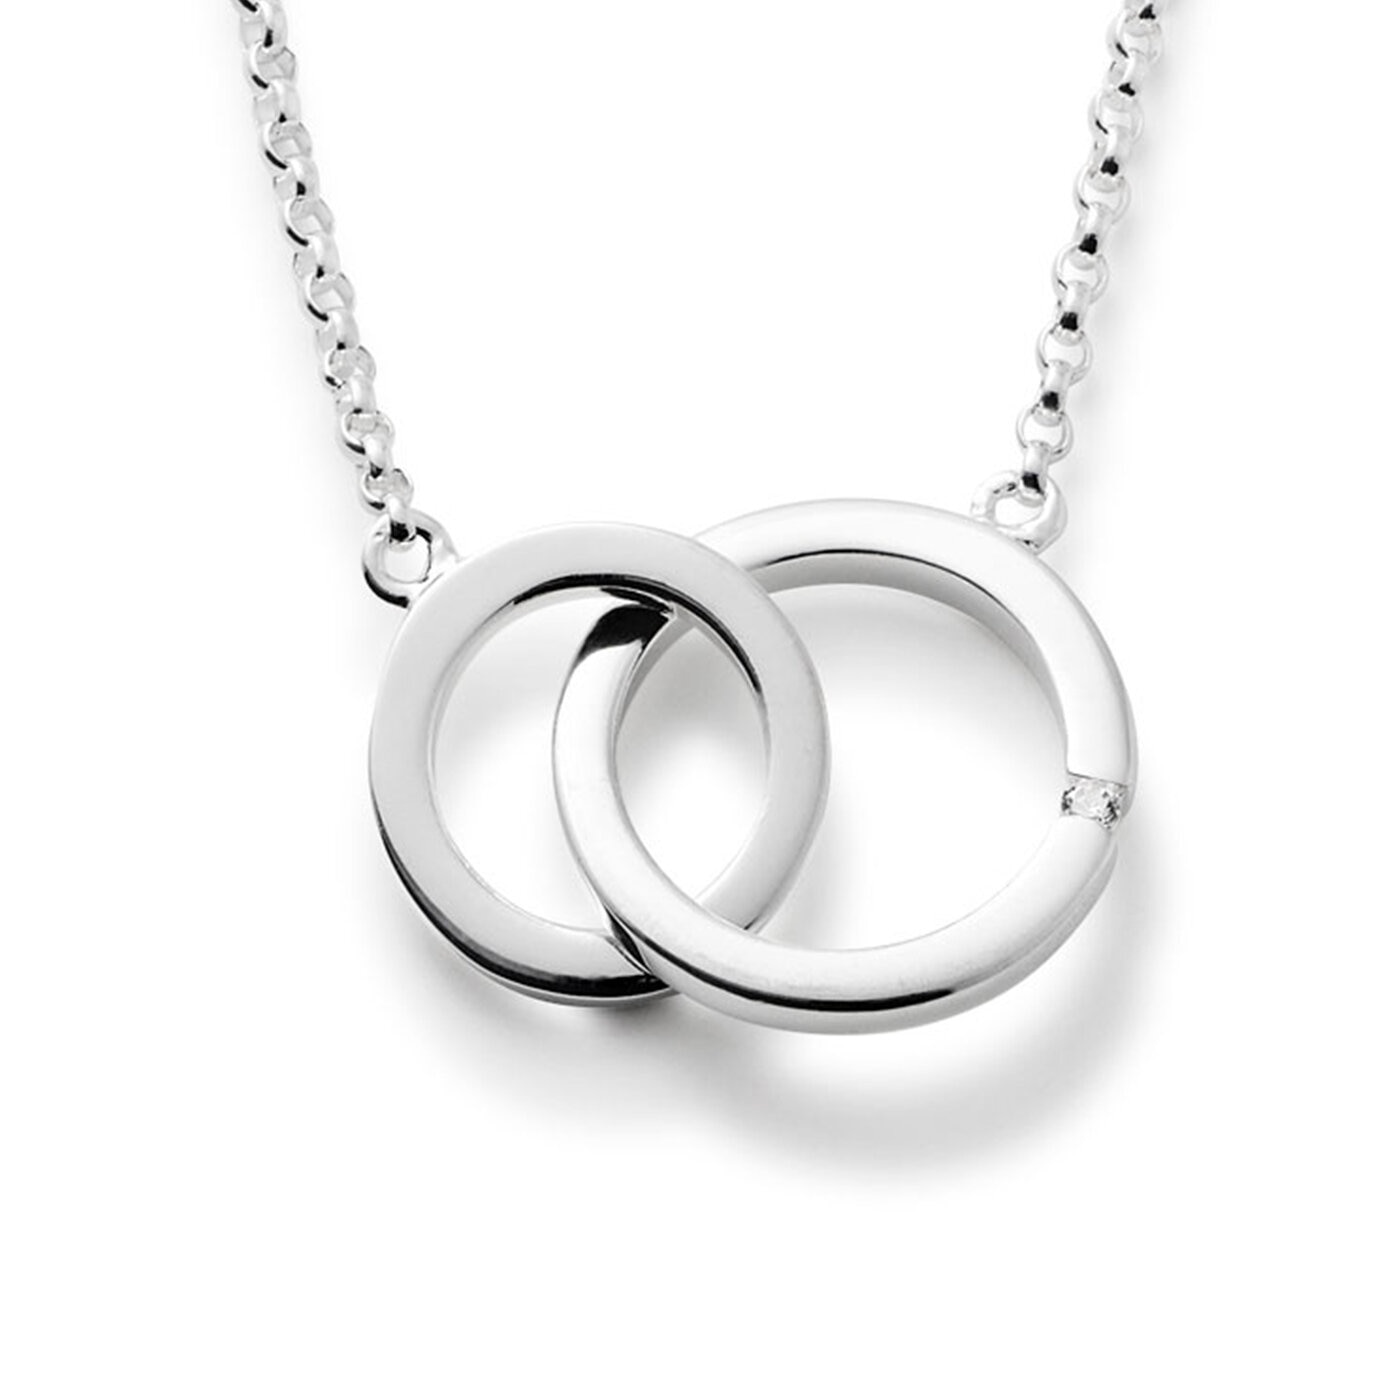 Two circles major necklace